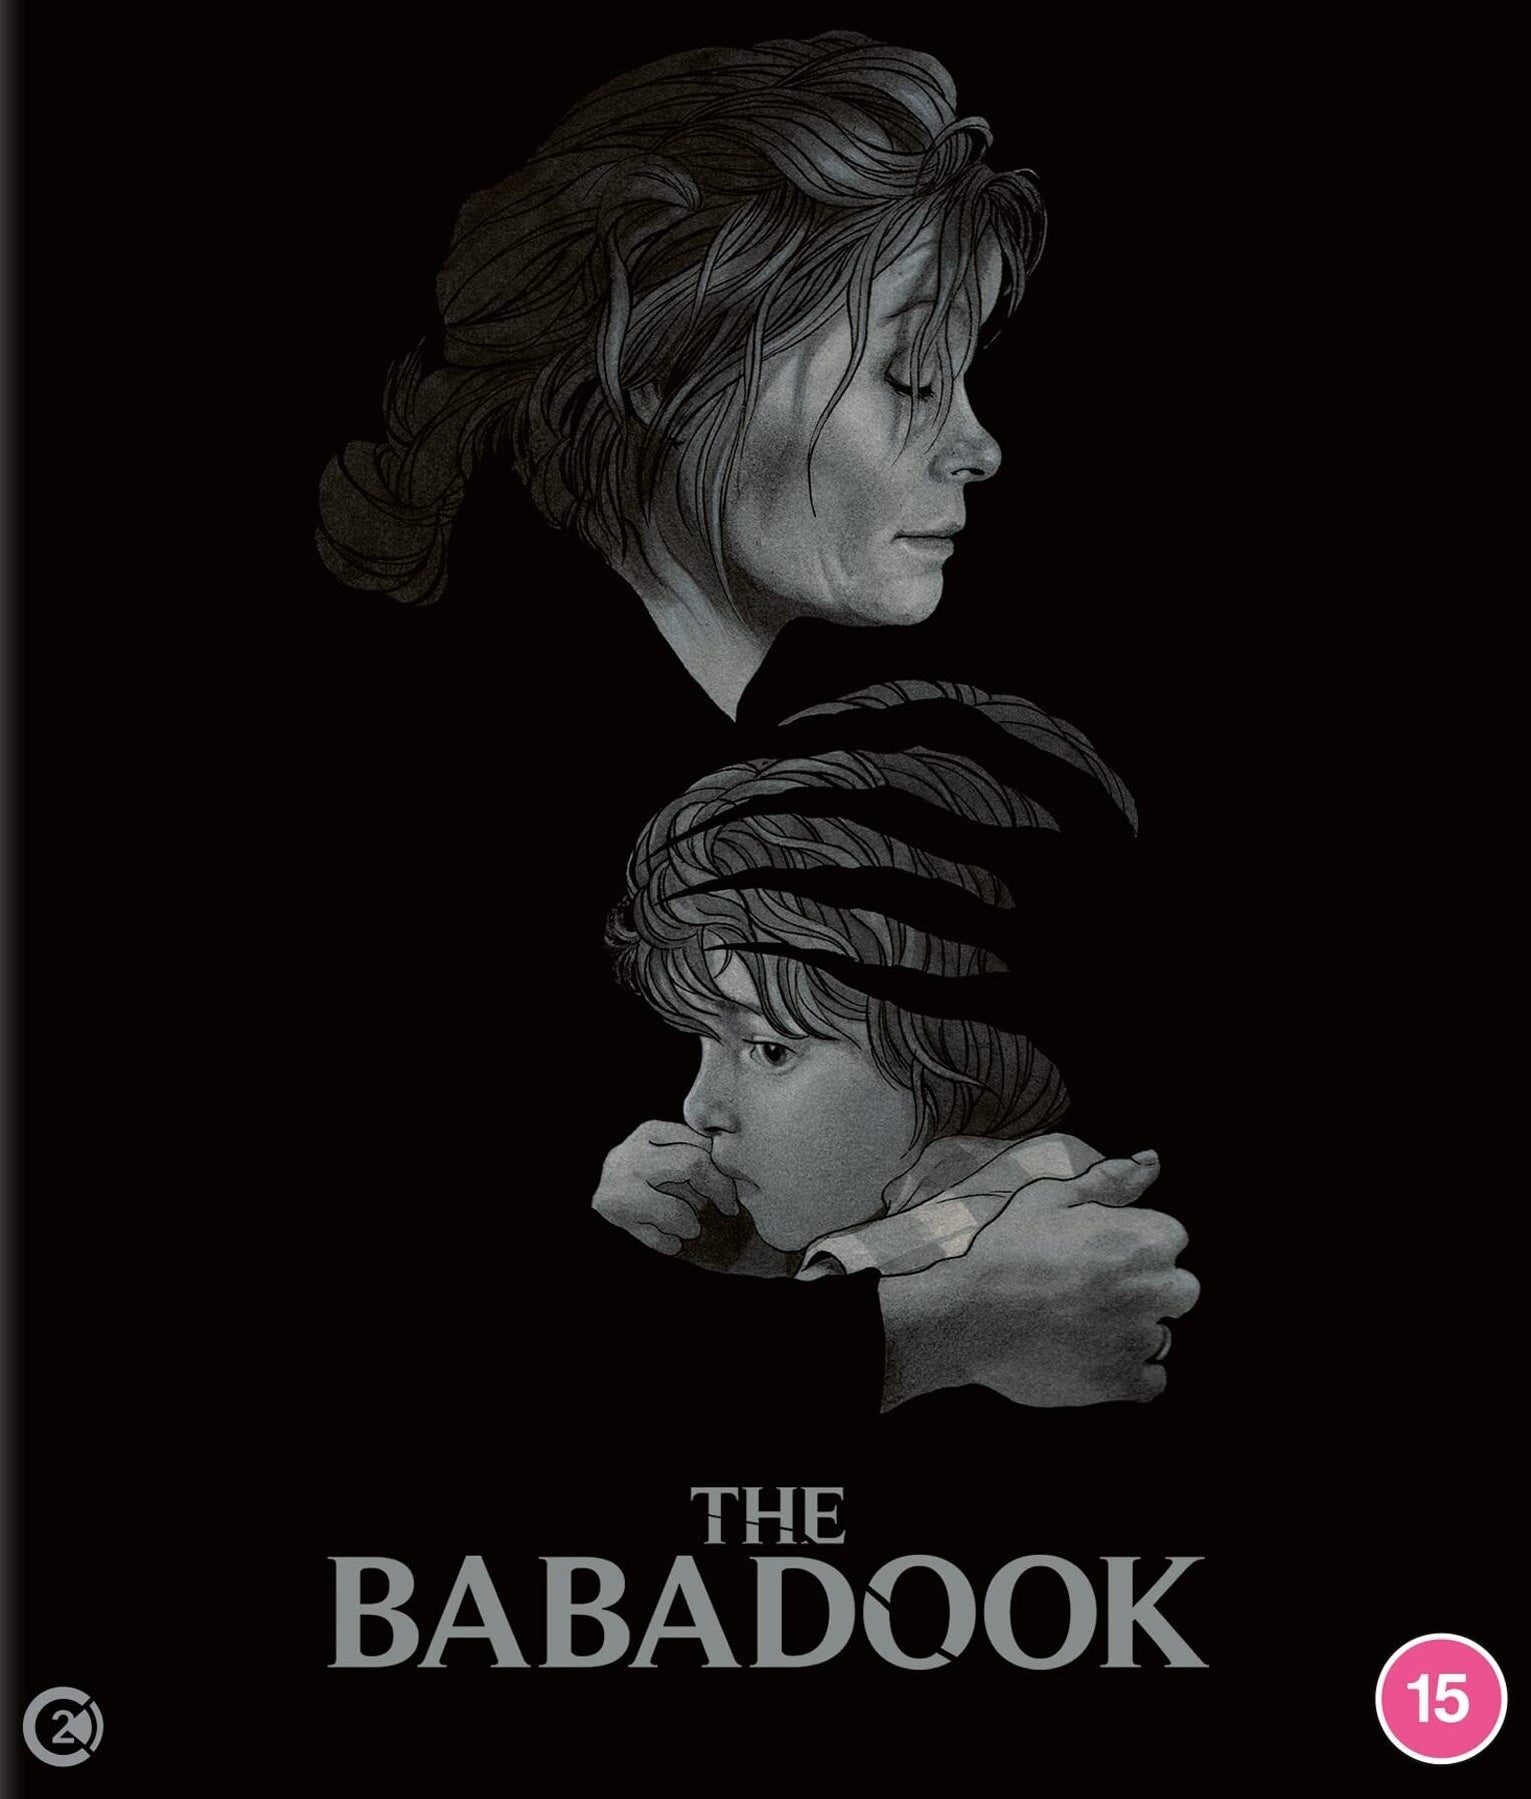 THE BABADOOK (REGION B IMPORT) BLU-RAY